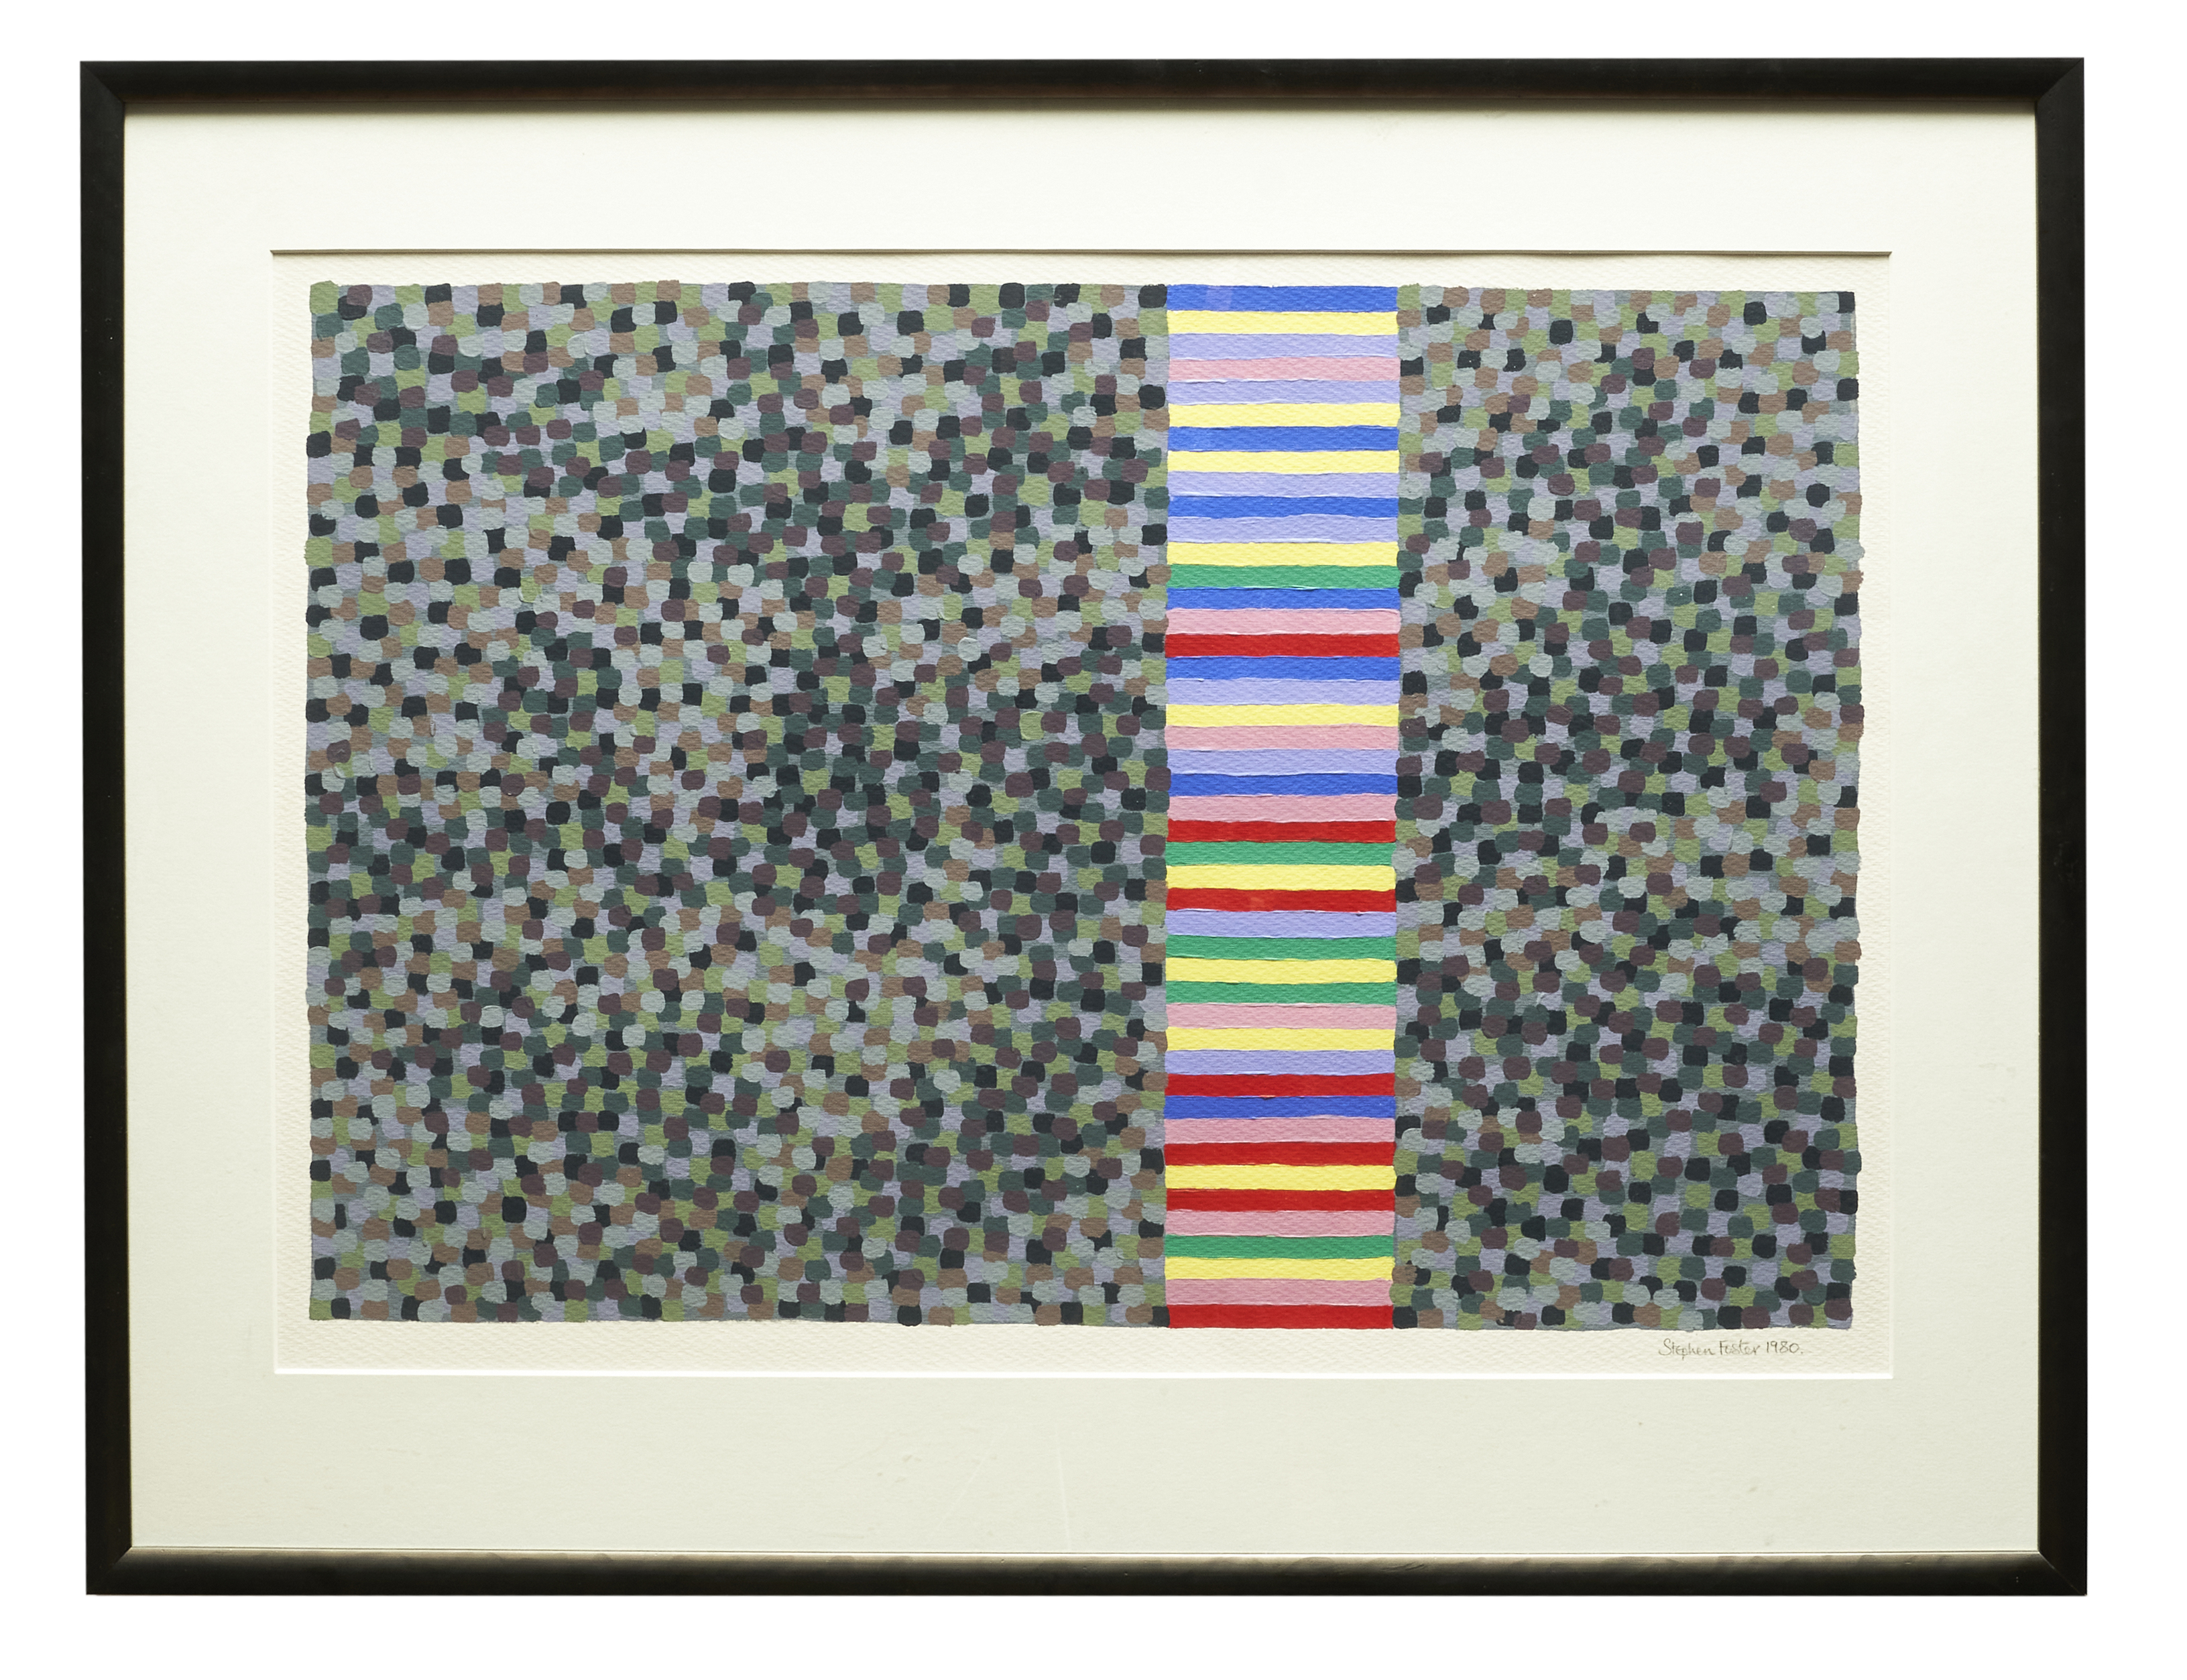 Stephen Foster, 1980, An abstract composition